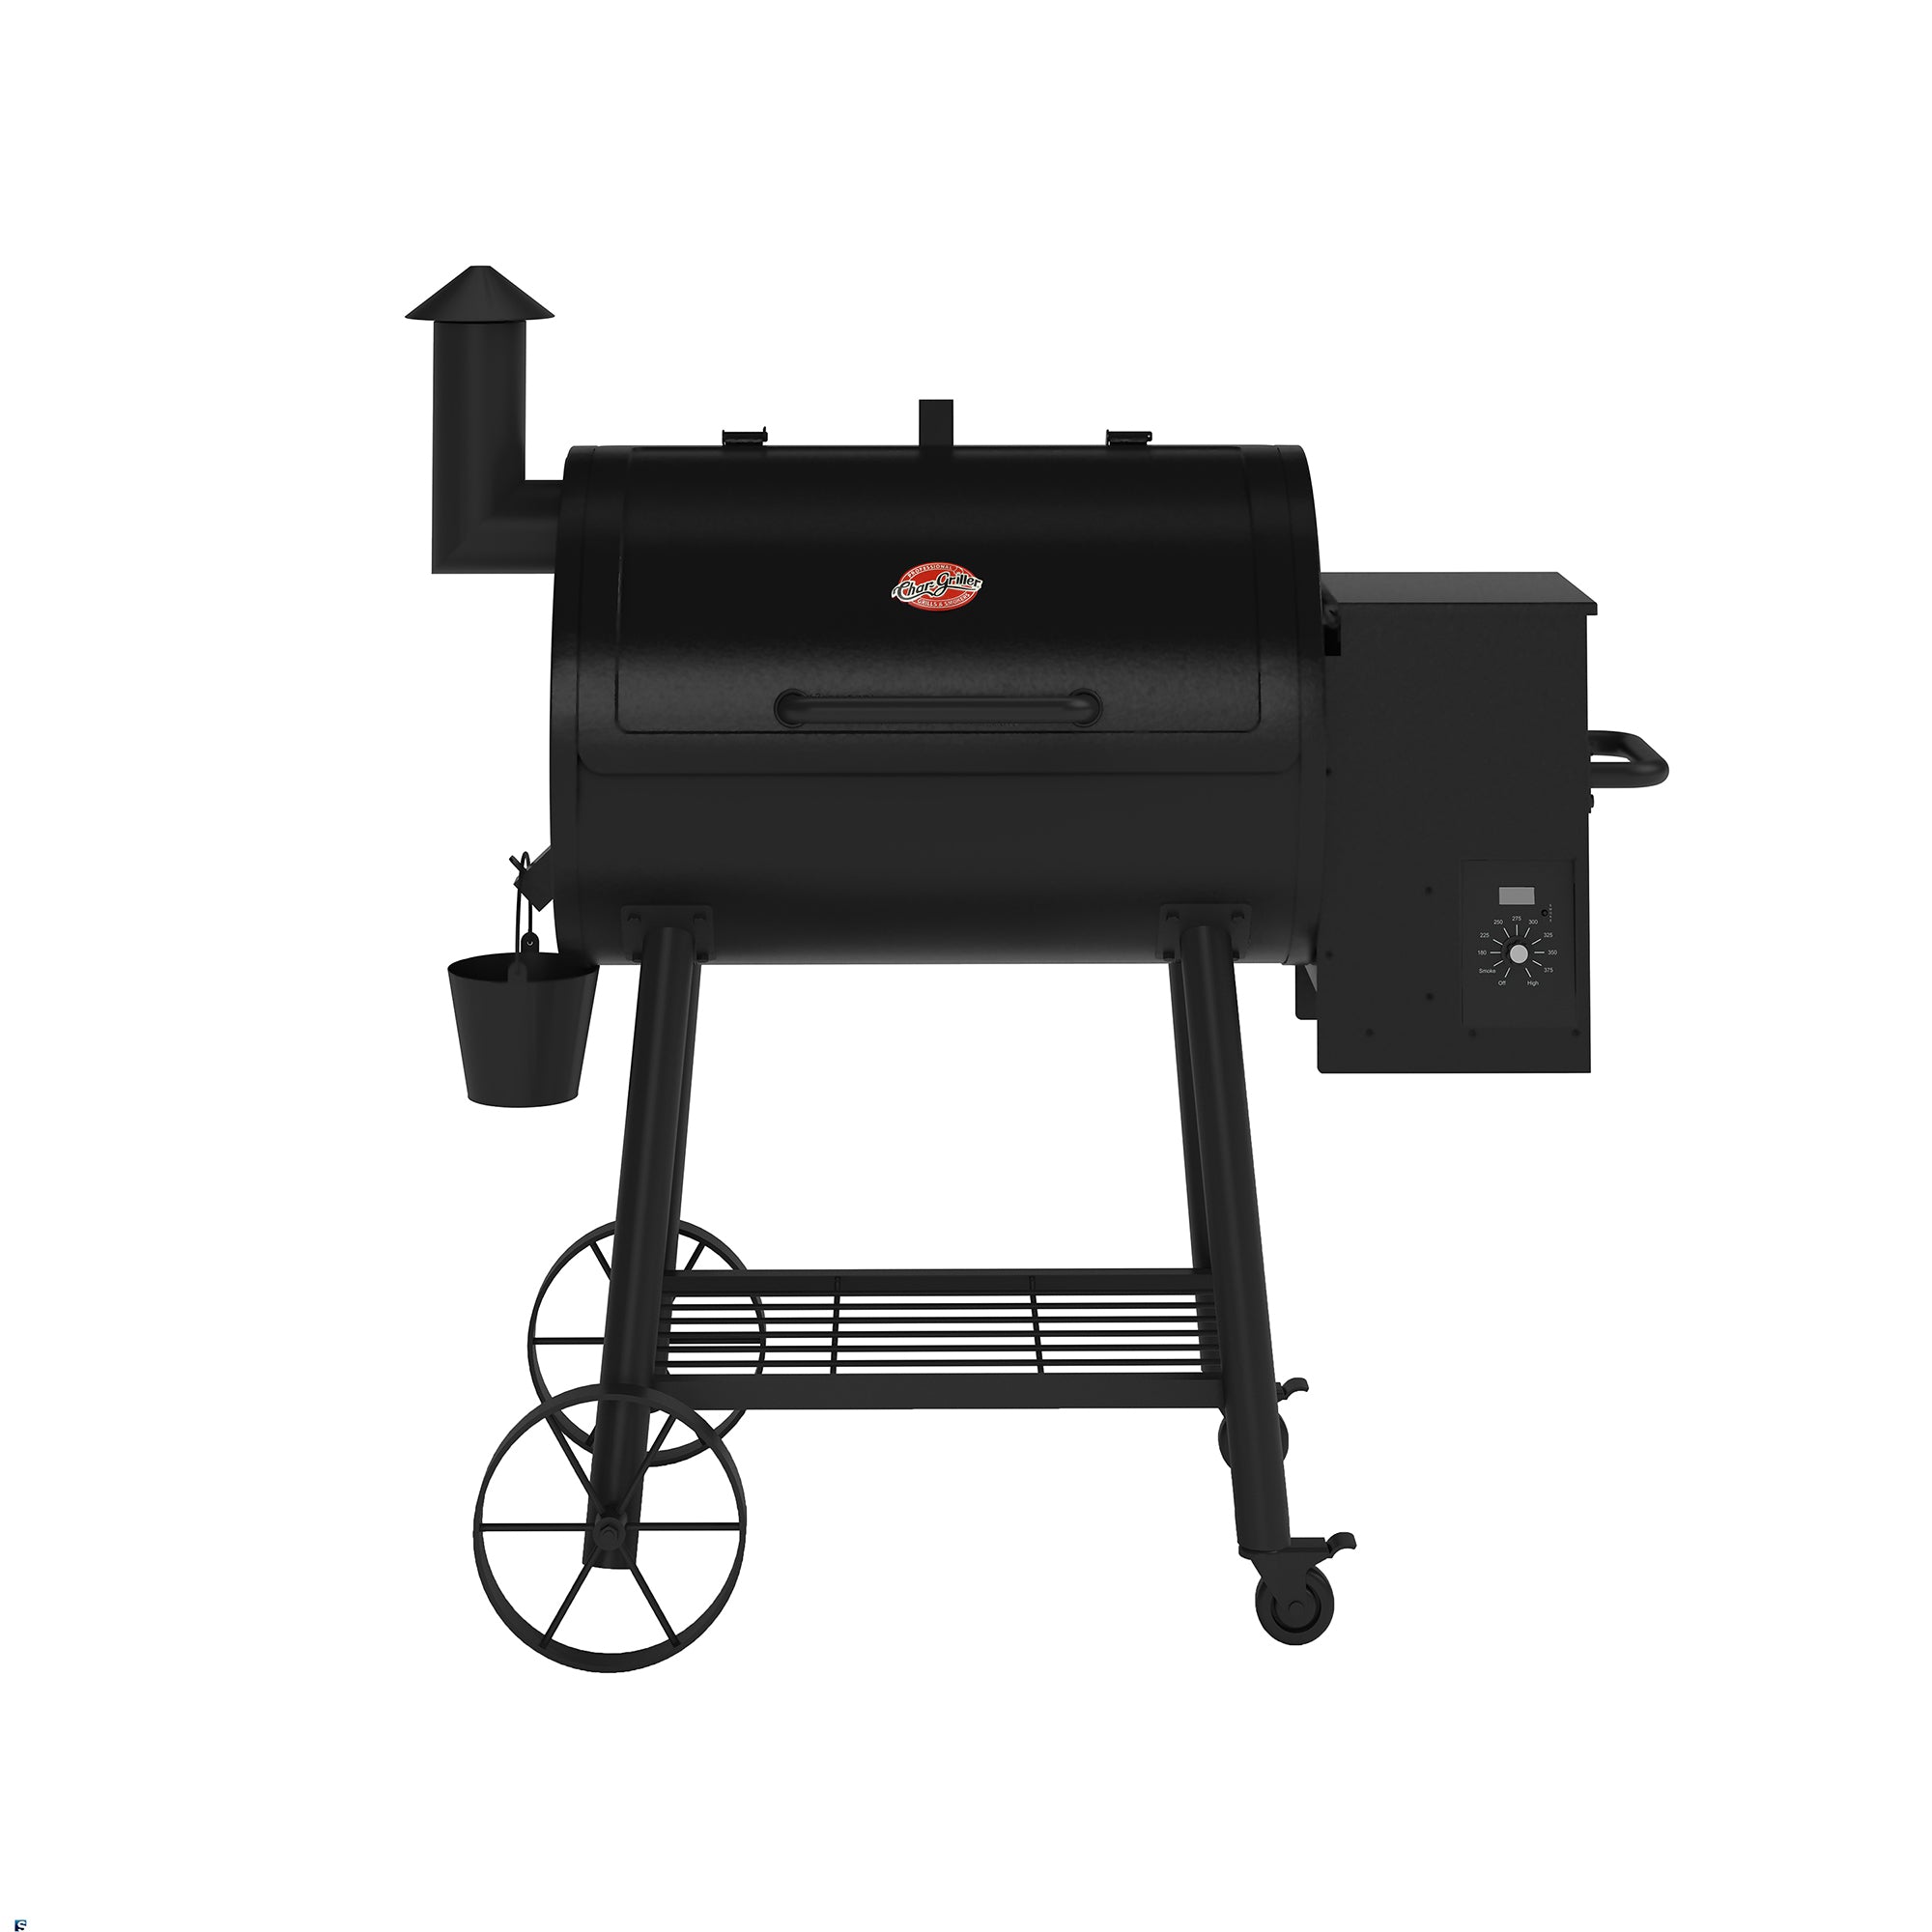 Char-Broil Grill Combo Brush Wood